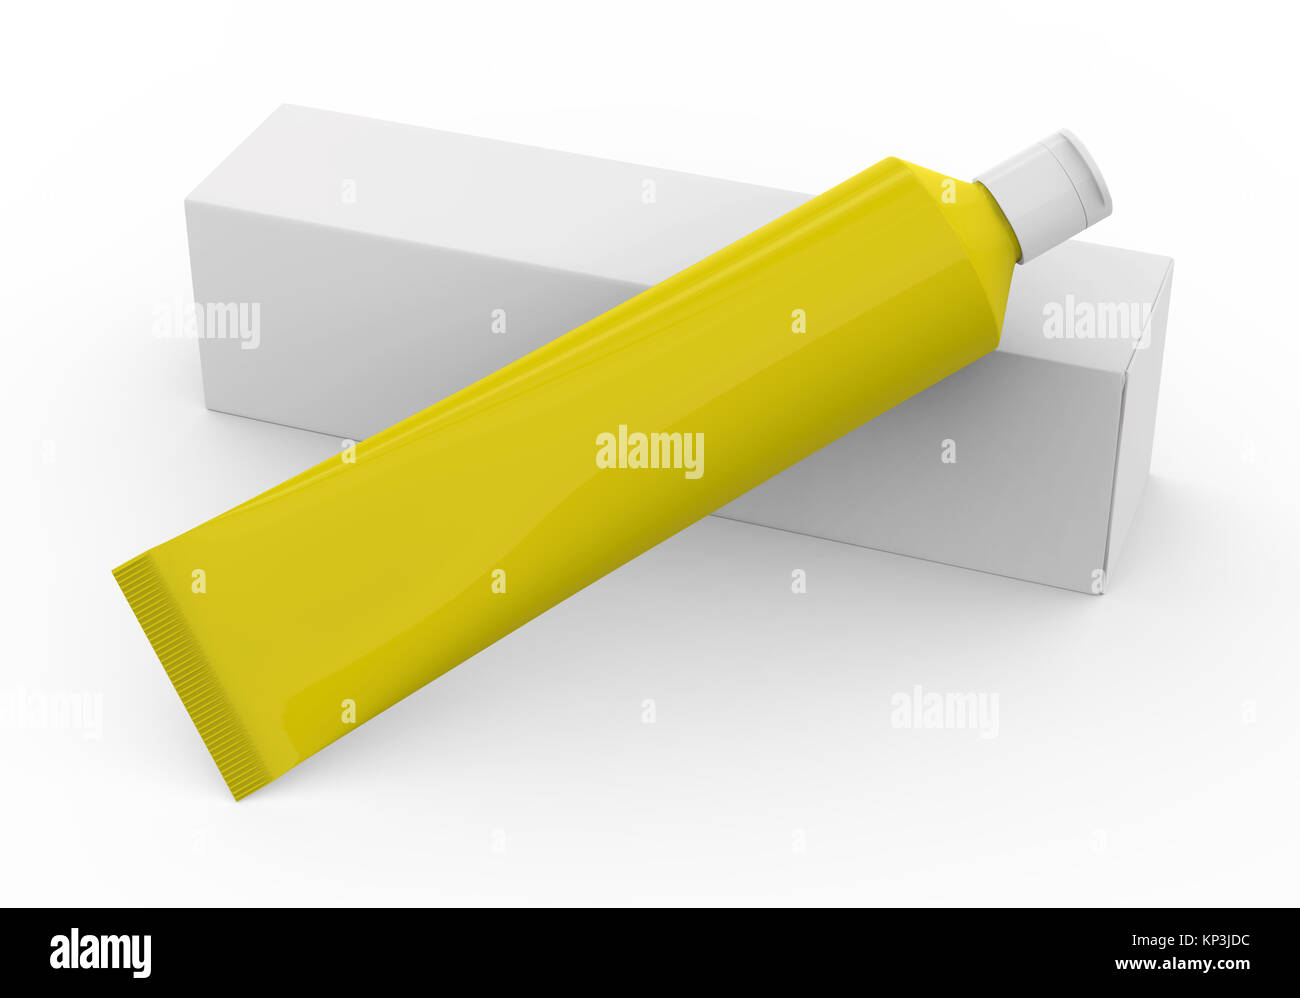 Download Toothpaste Package Mockup Blank Yellow Tube With Paper Box In 3d Stock Photo Alamy Yellowimages Mockups